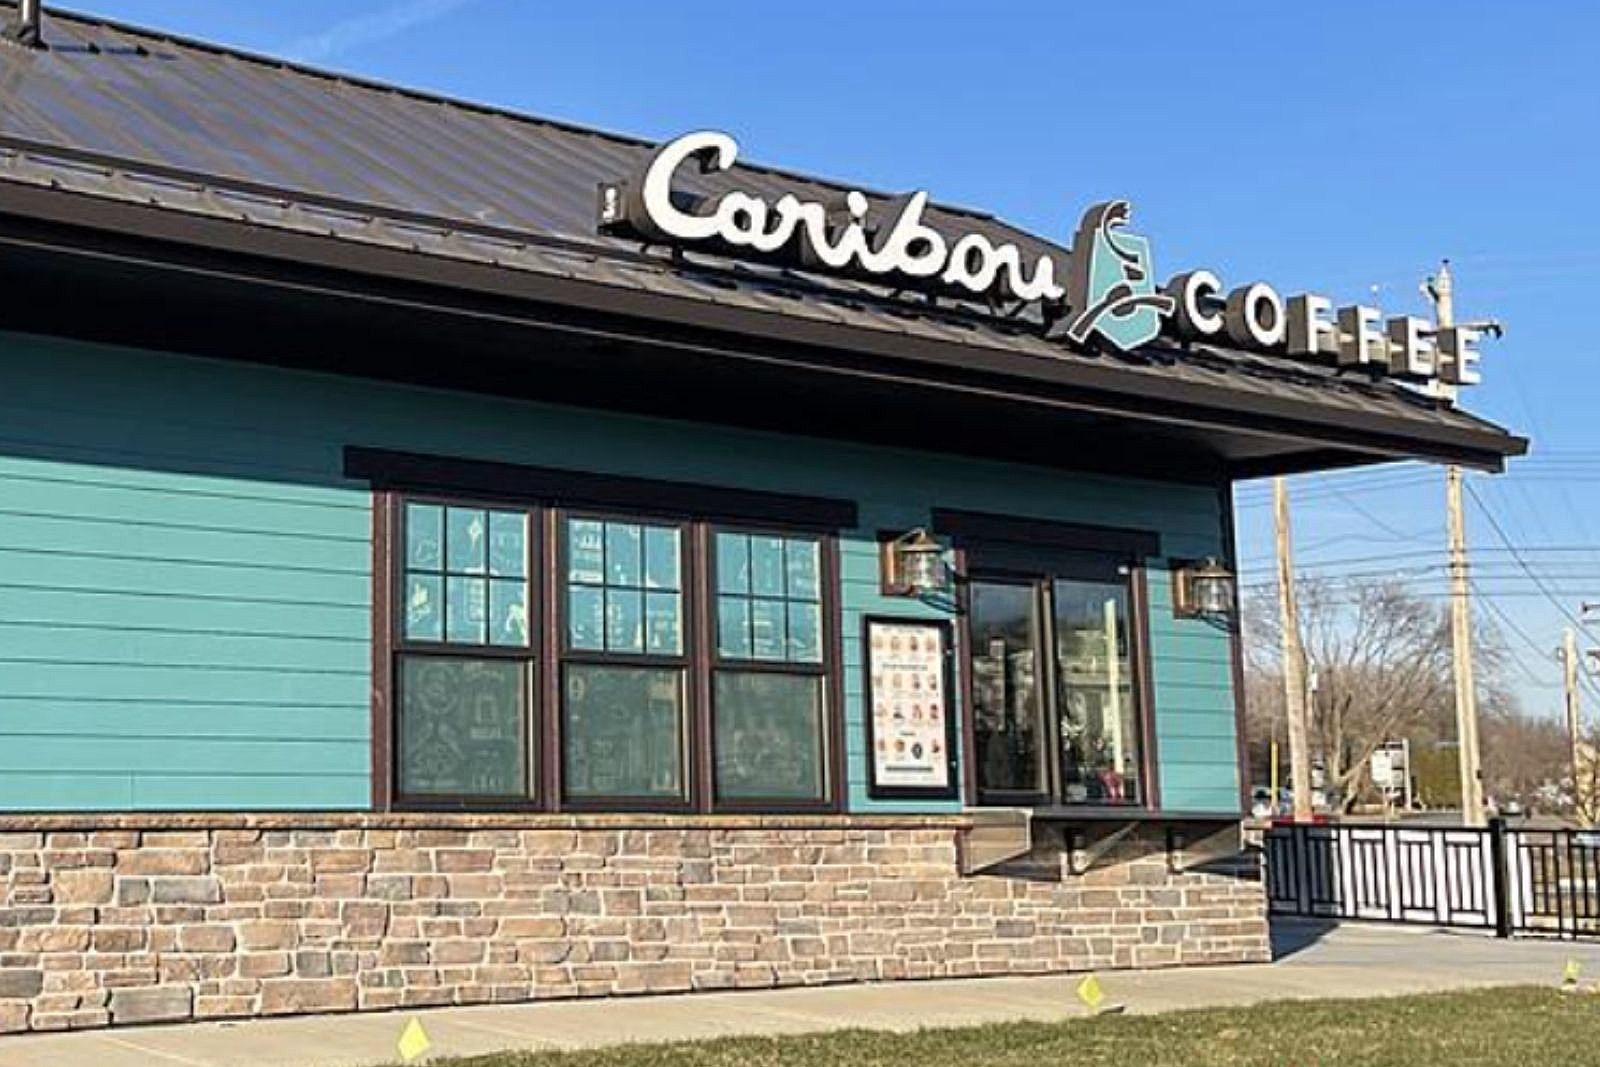 Ten things to know about cold press - Caribou Coffee